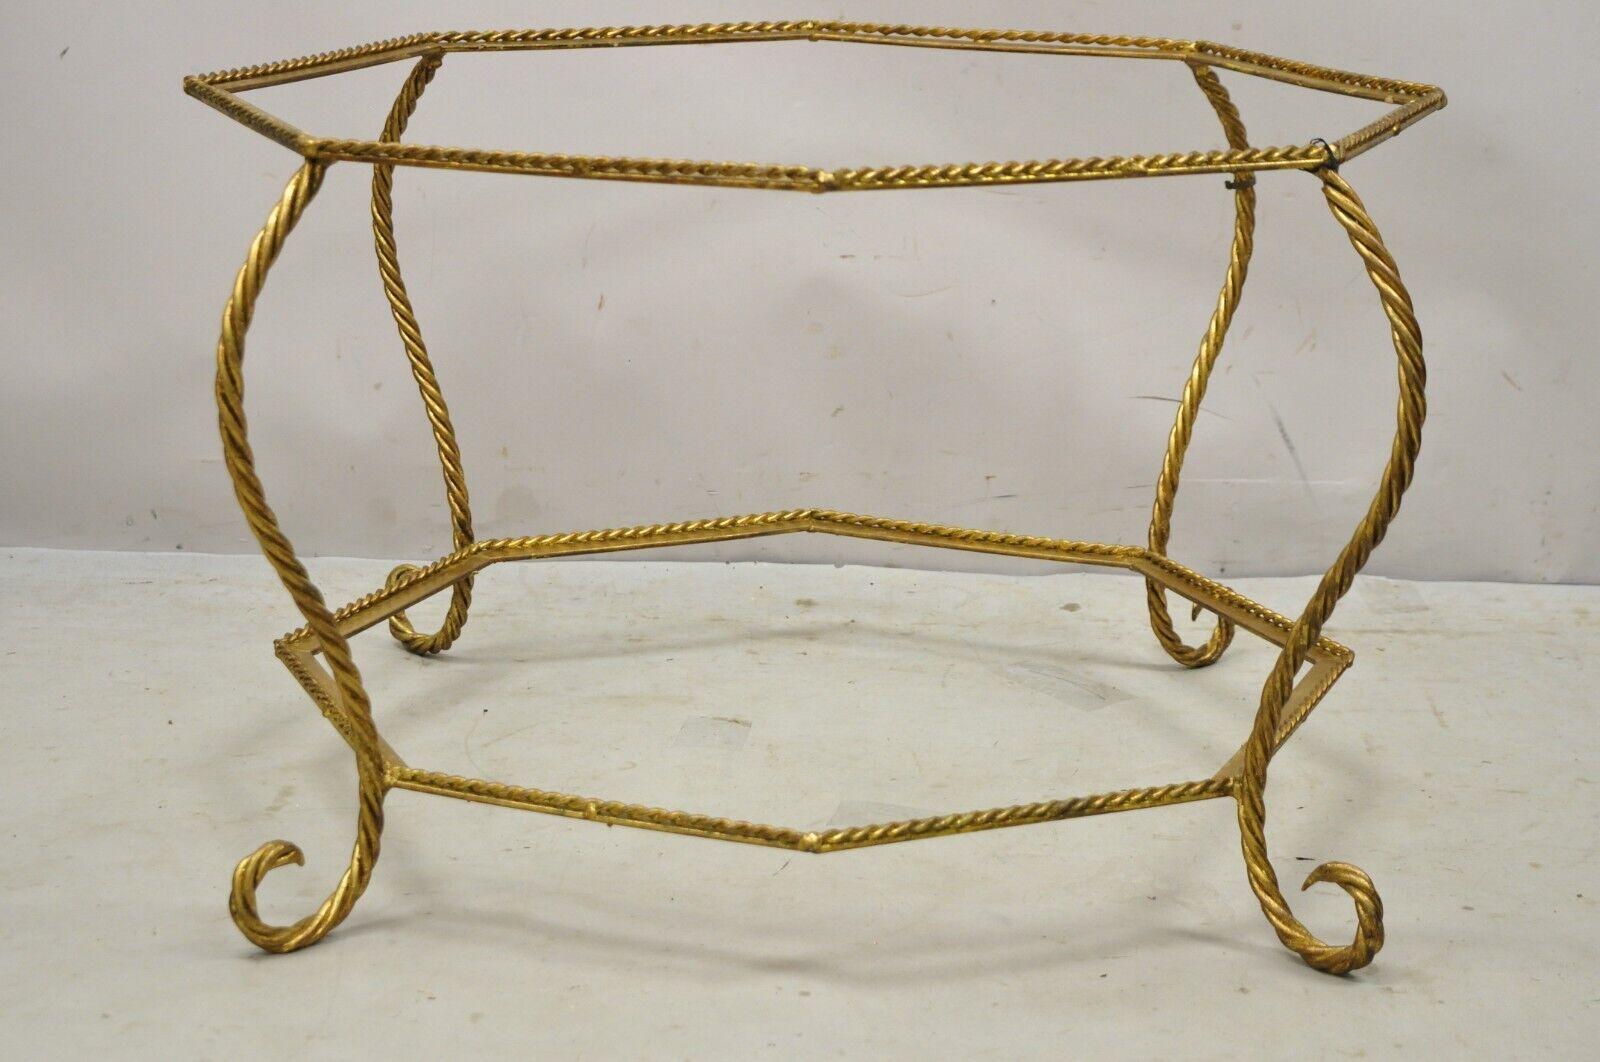 Vintage Italian Hollywood Regency gold gilt iron rope metal coffee table base. Item features a wrought iron gold gilt rope form base, 2 surface tiers (no glass), quality Italian craftsmanship, great style and form. Great to add glass or a wood to